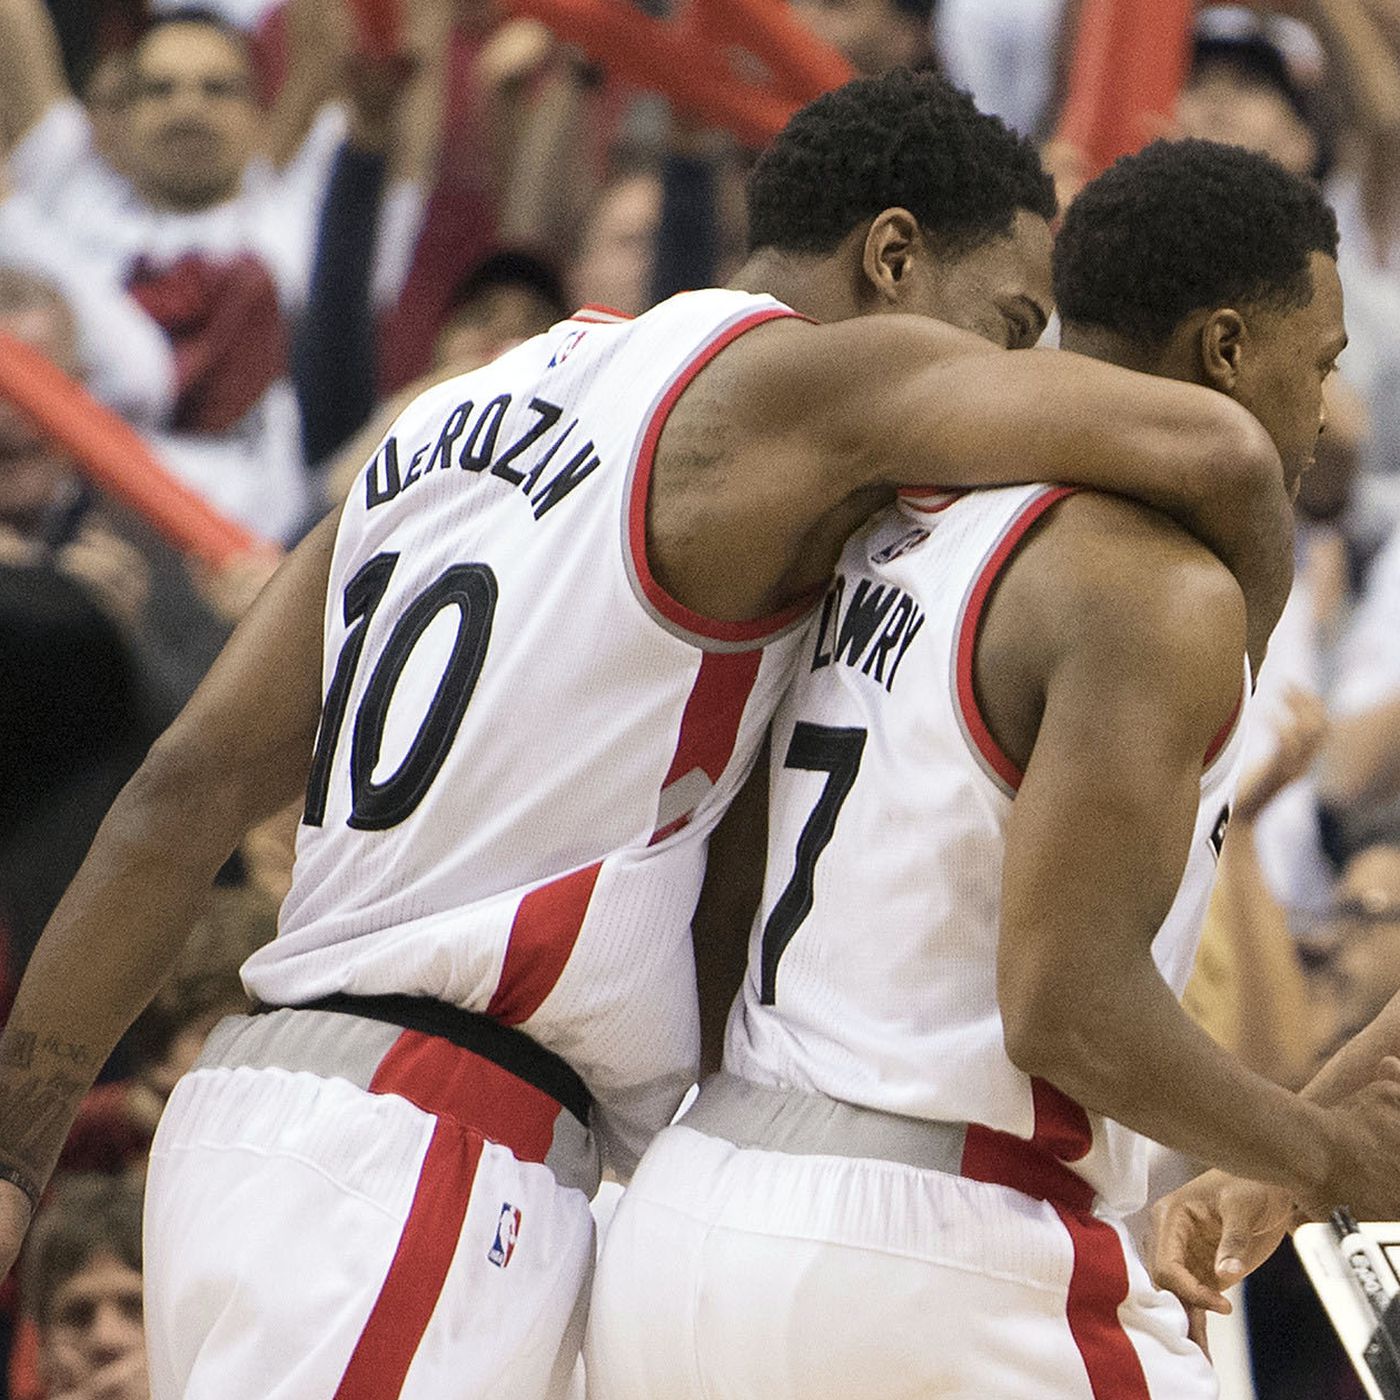 Kyle Lowry's postseason shooting struggle part of a troubling